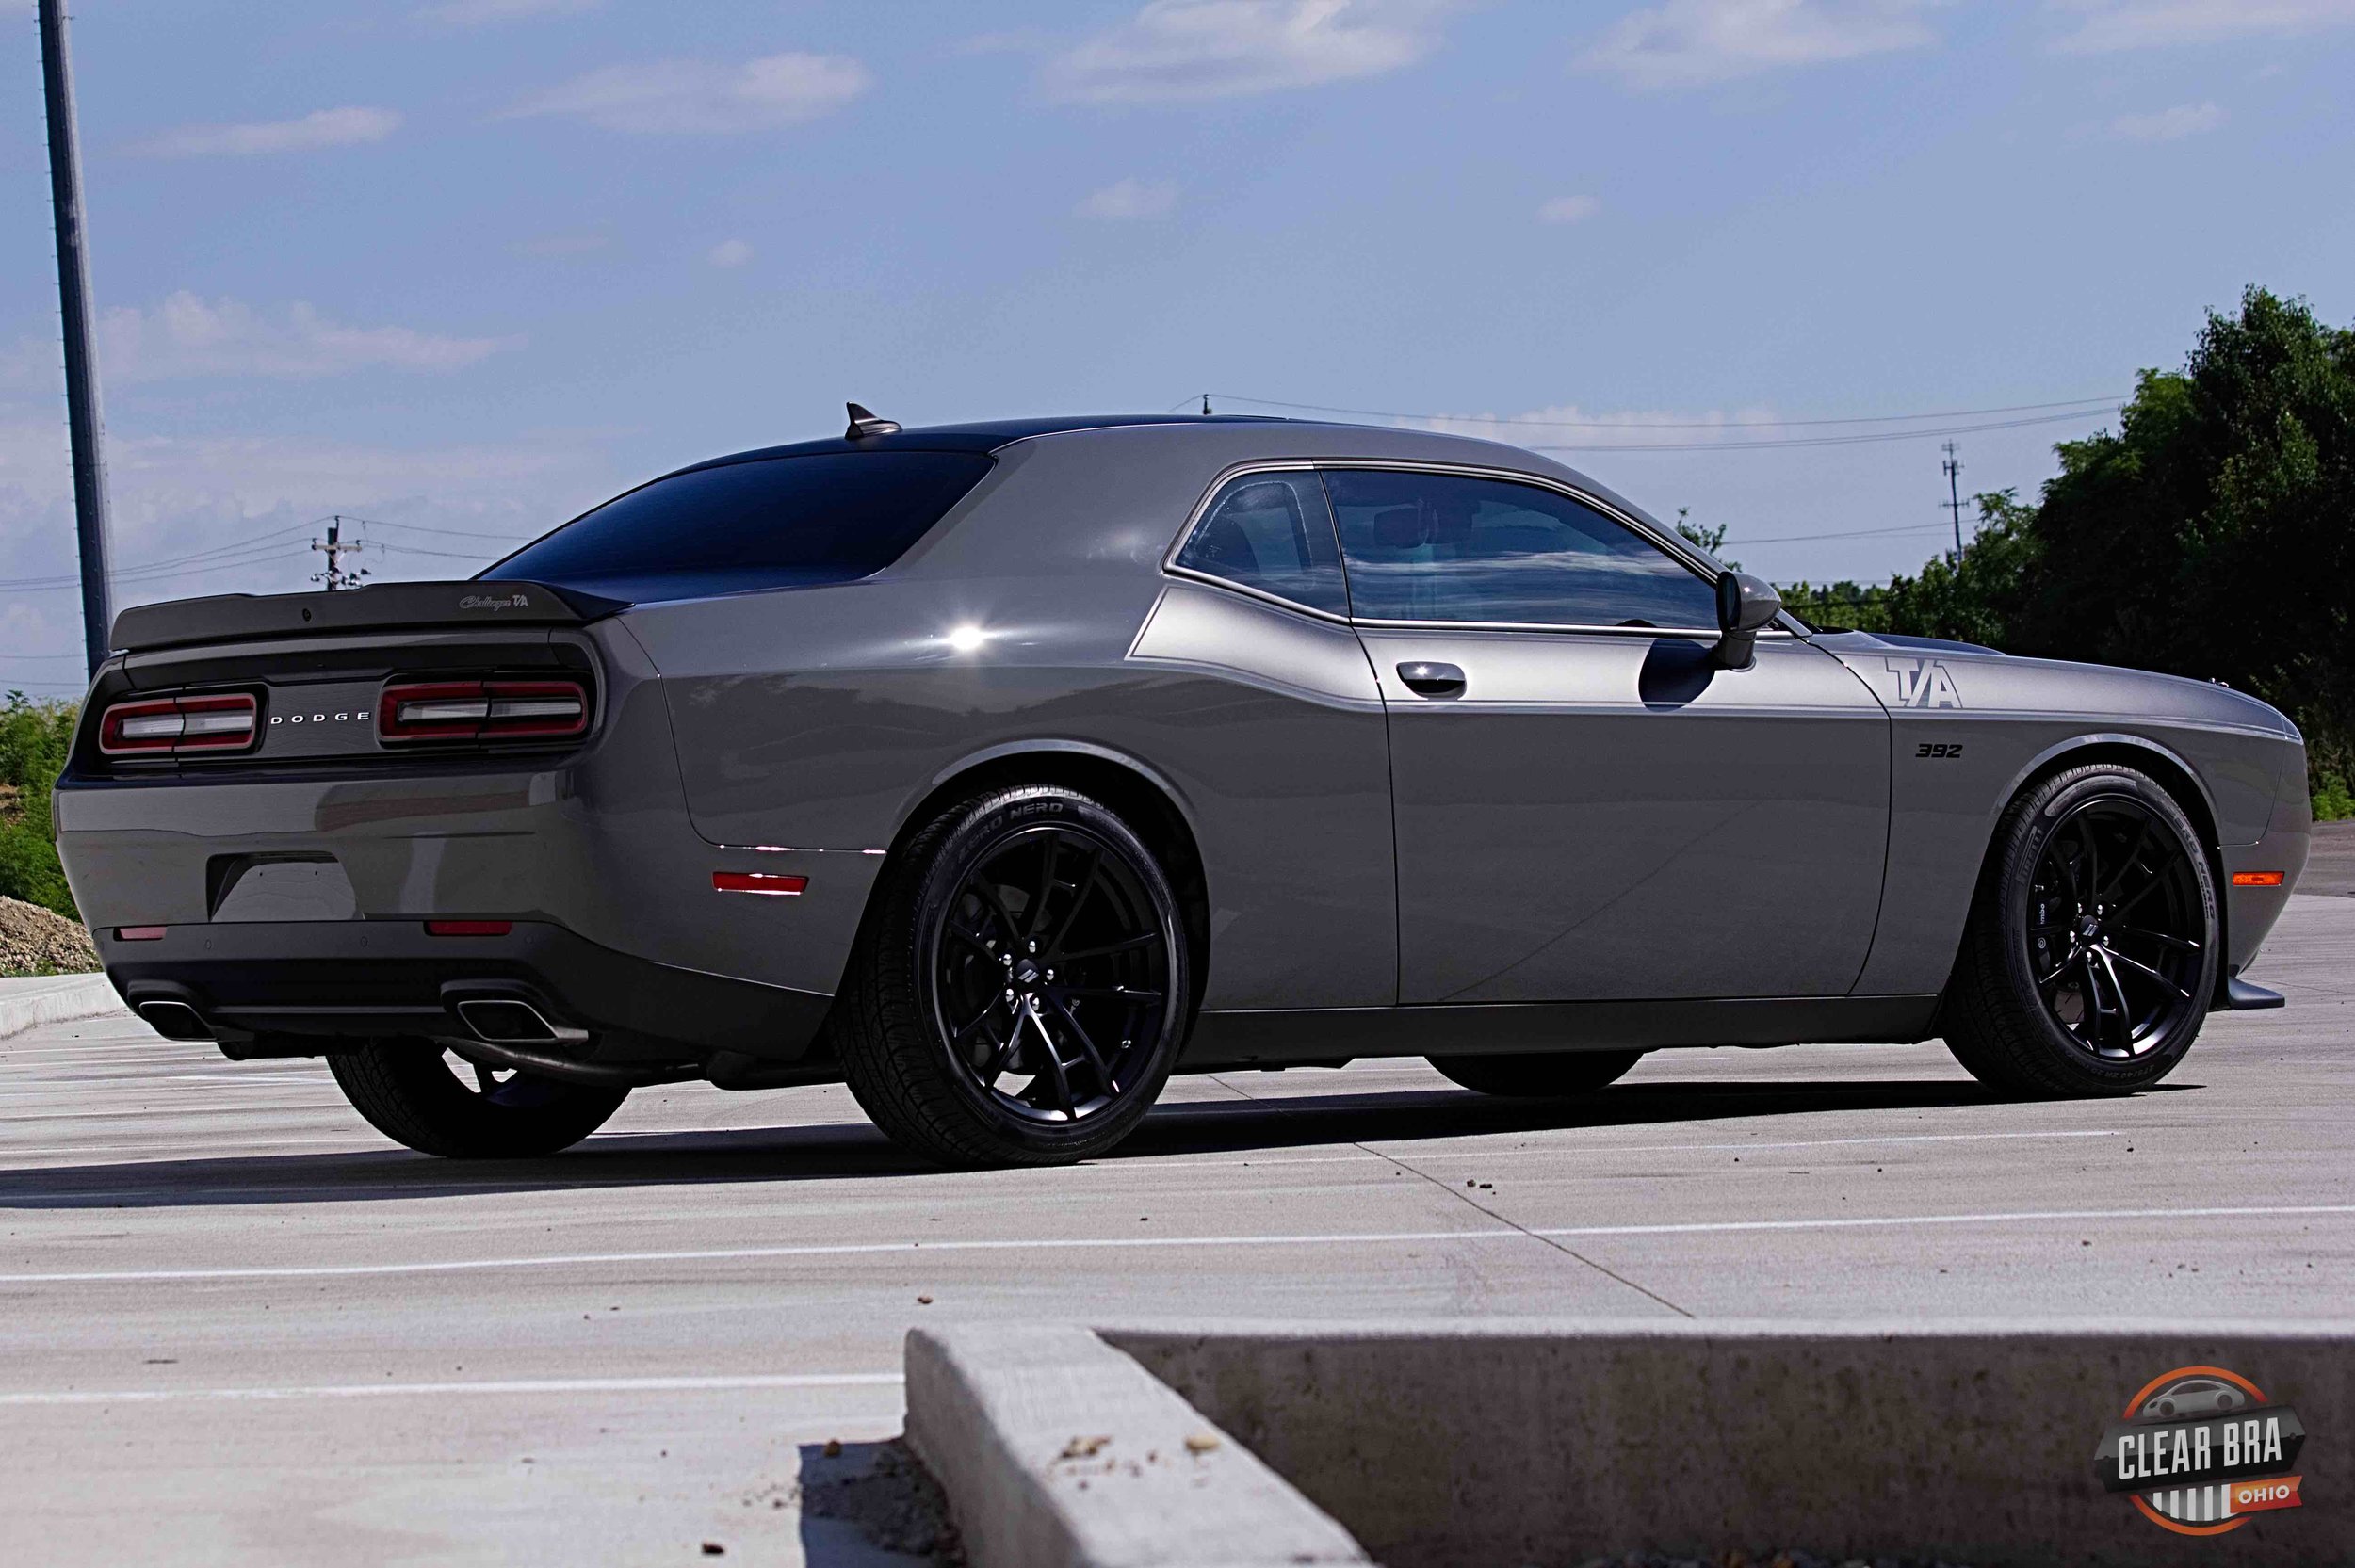 Stealth Dodge Challenger Needed a Custom Clear Bra Solution